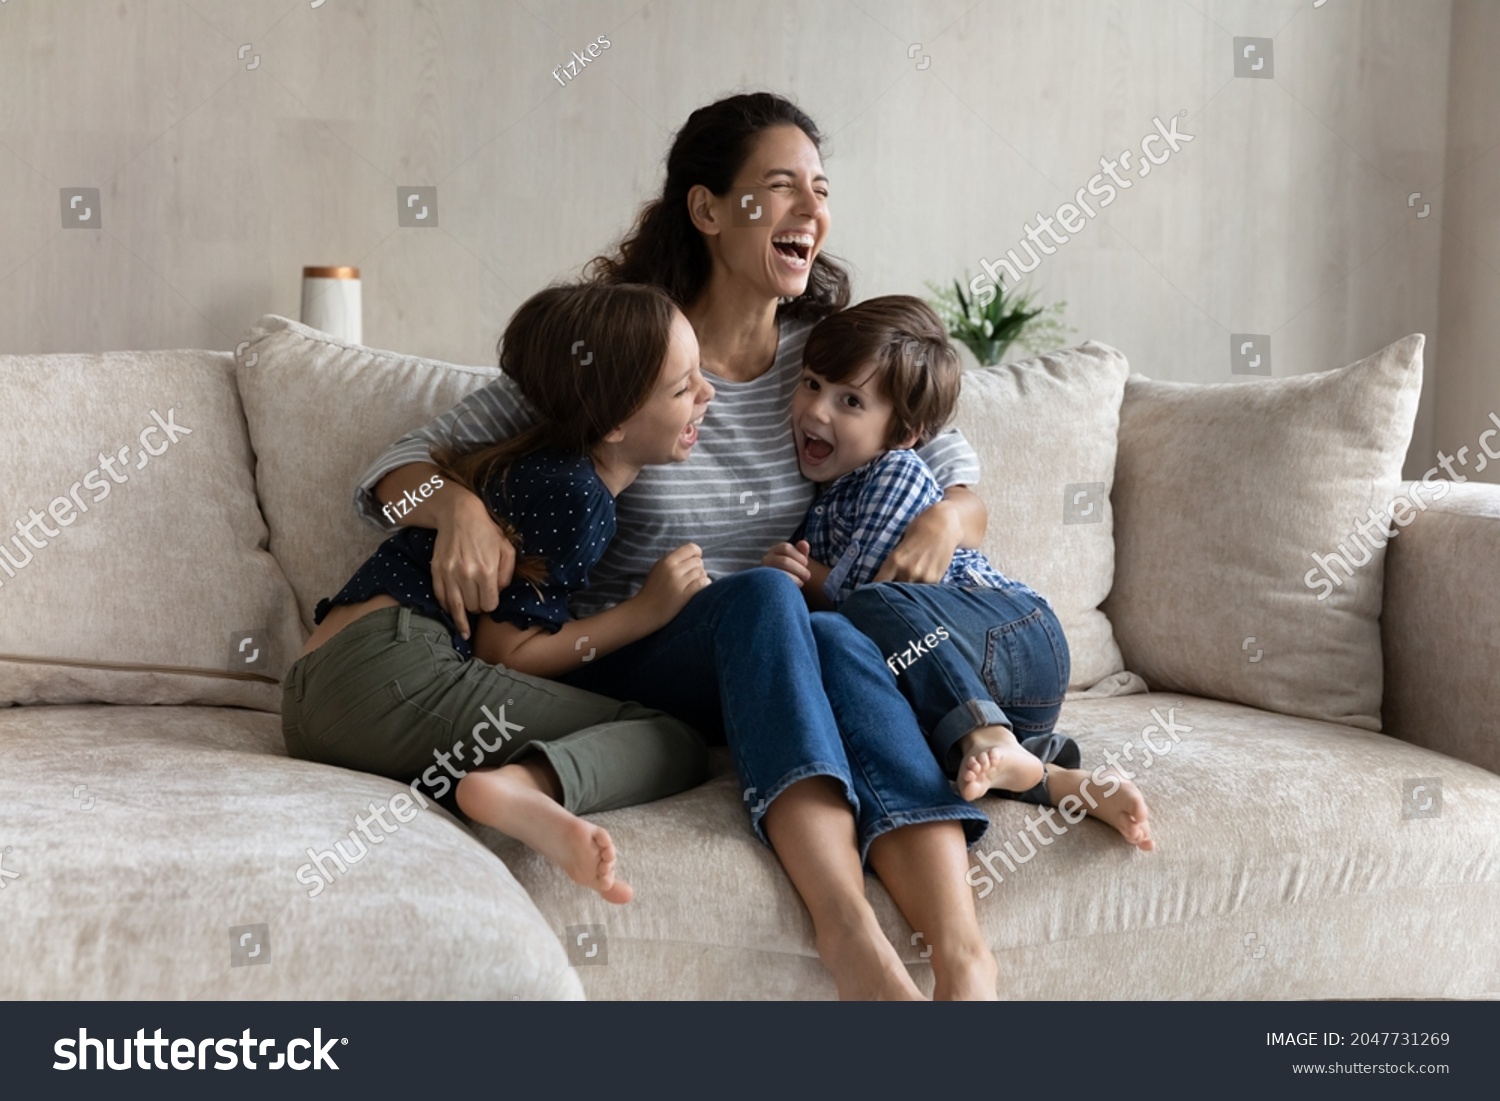 Overjoyed young hispanic mother cuddling small laughing kids siblings, having fun entertaining resting together on comfortable sofa. Joyful multigenerational family playing on weekend at home. #2047731269